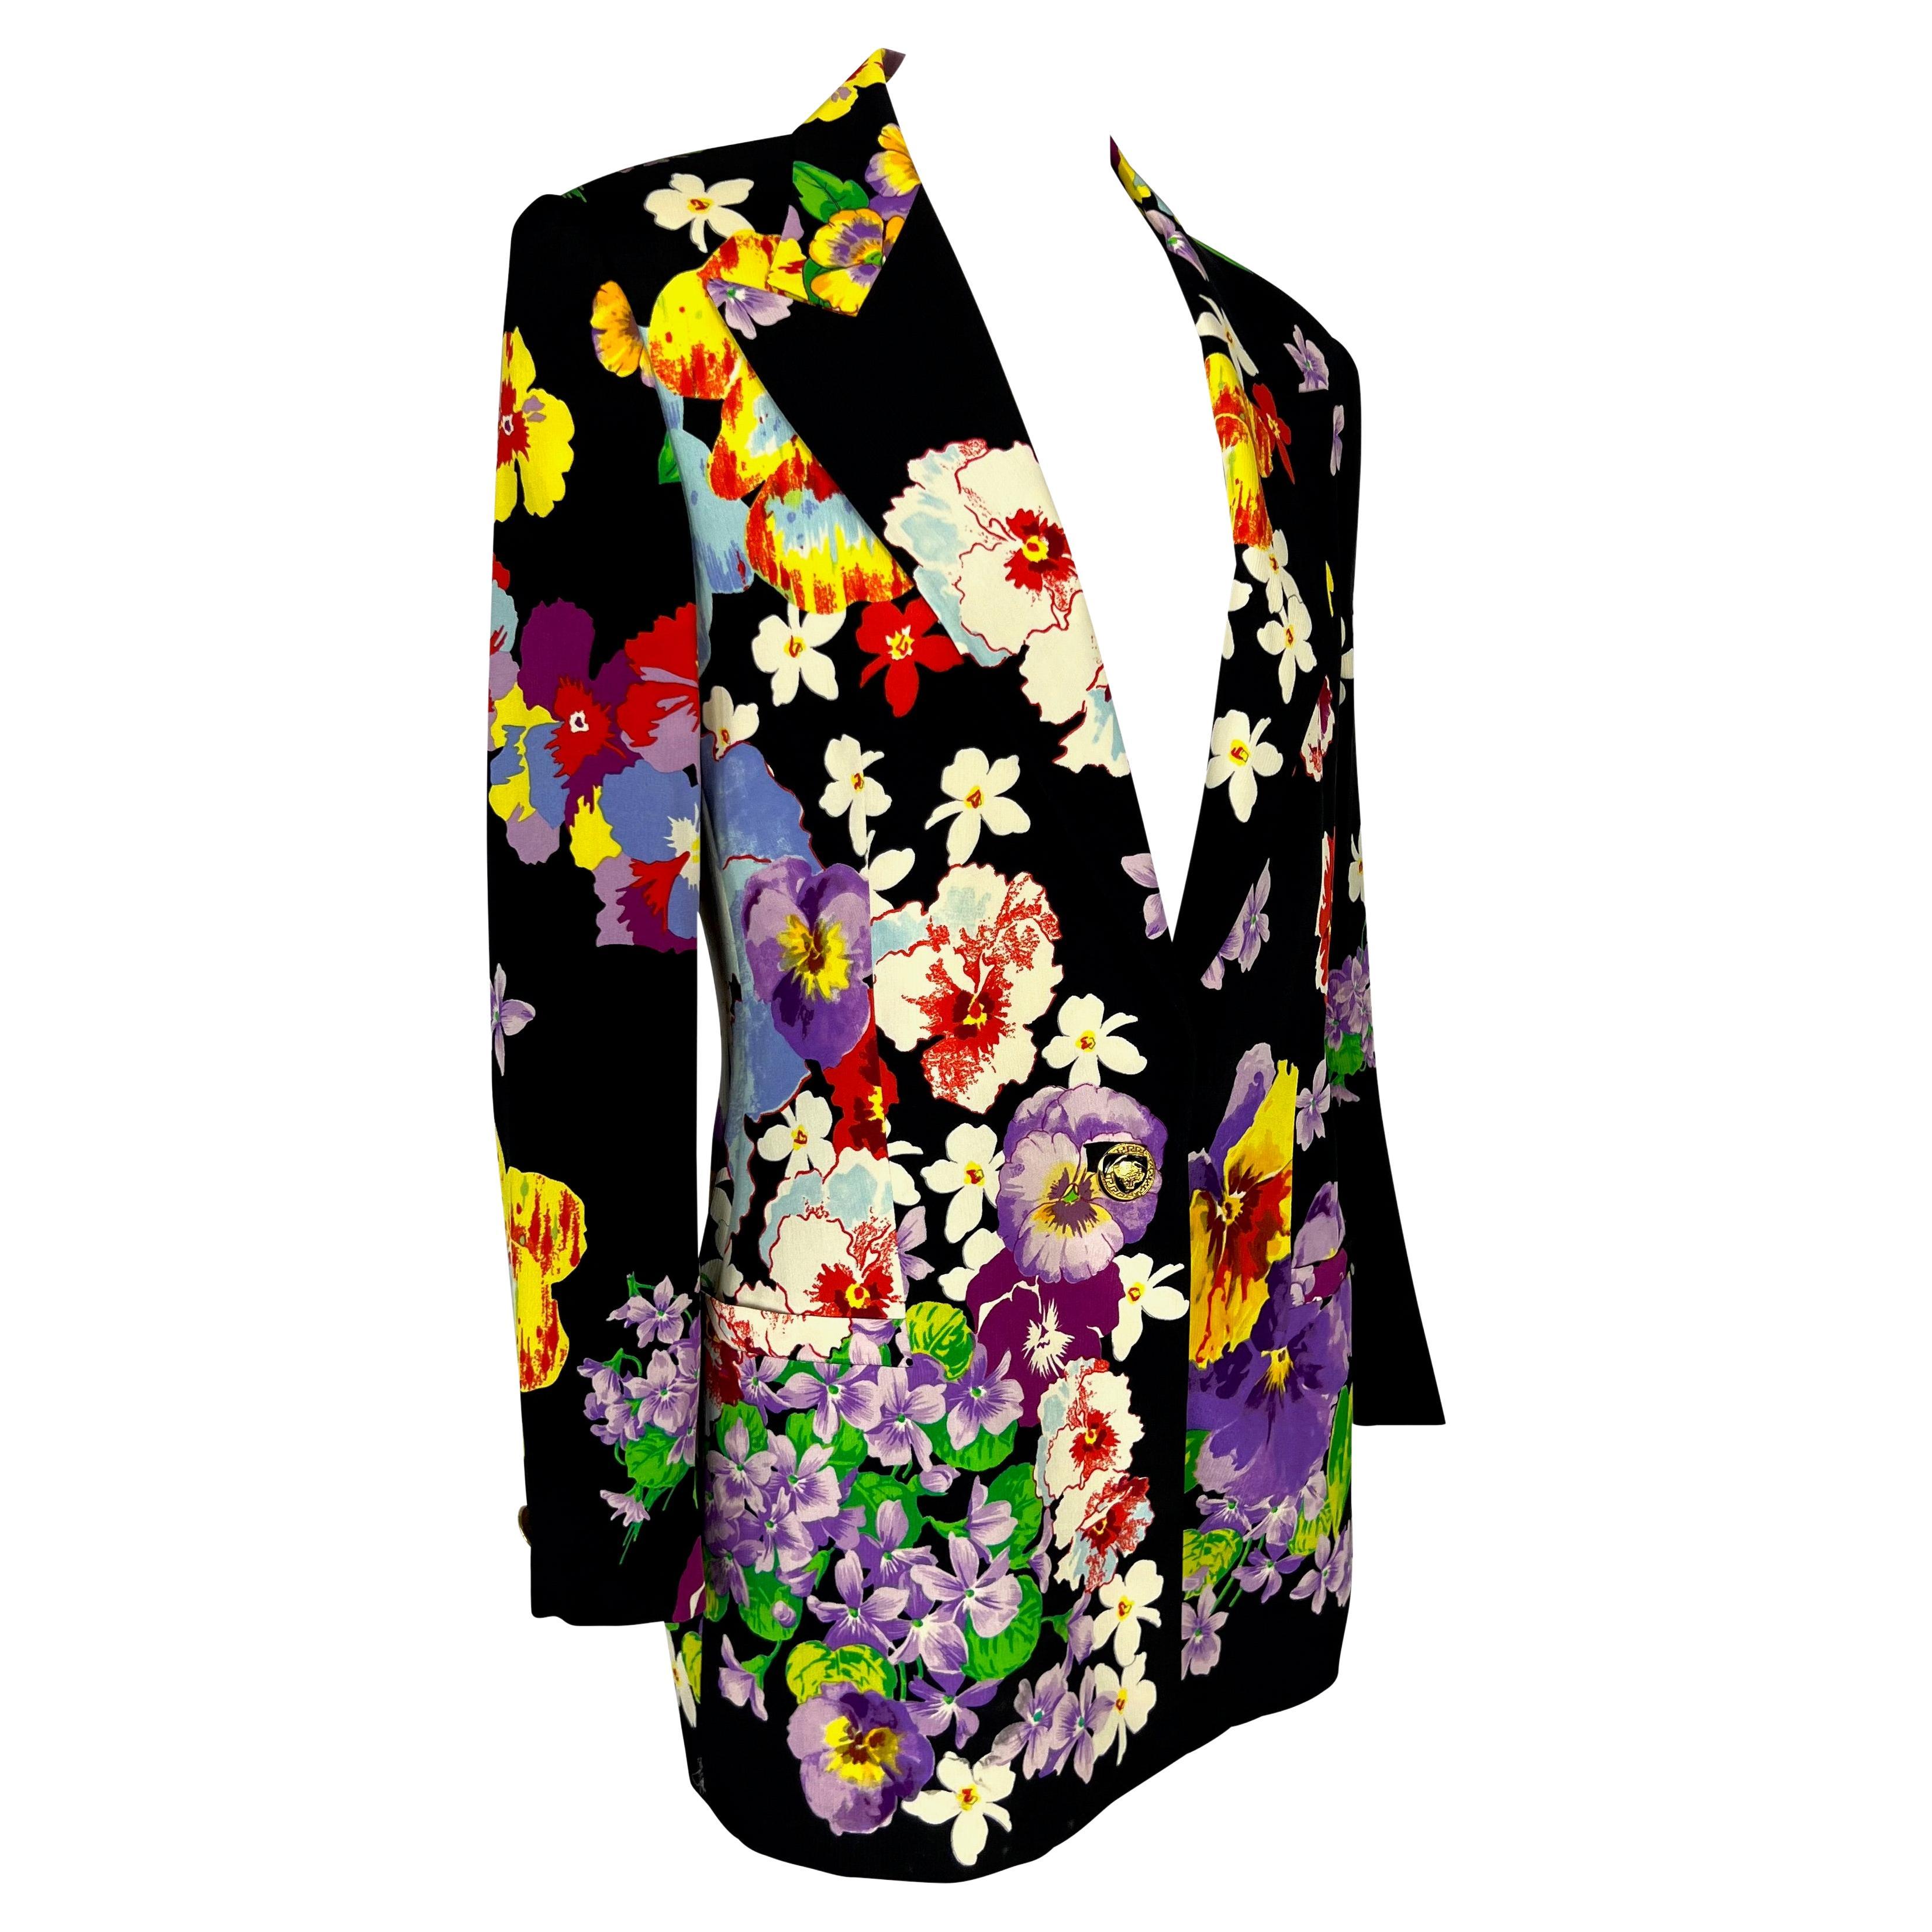 S/S 1994 Gianni Versace Couture Floral Print Black Silk Blazer Jacket In Good Condition For Sale In West Hollywood, CA